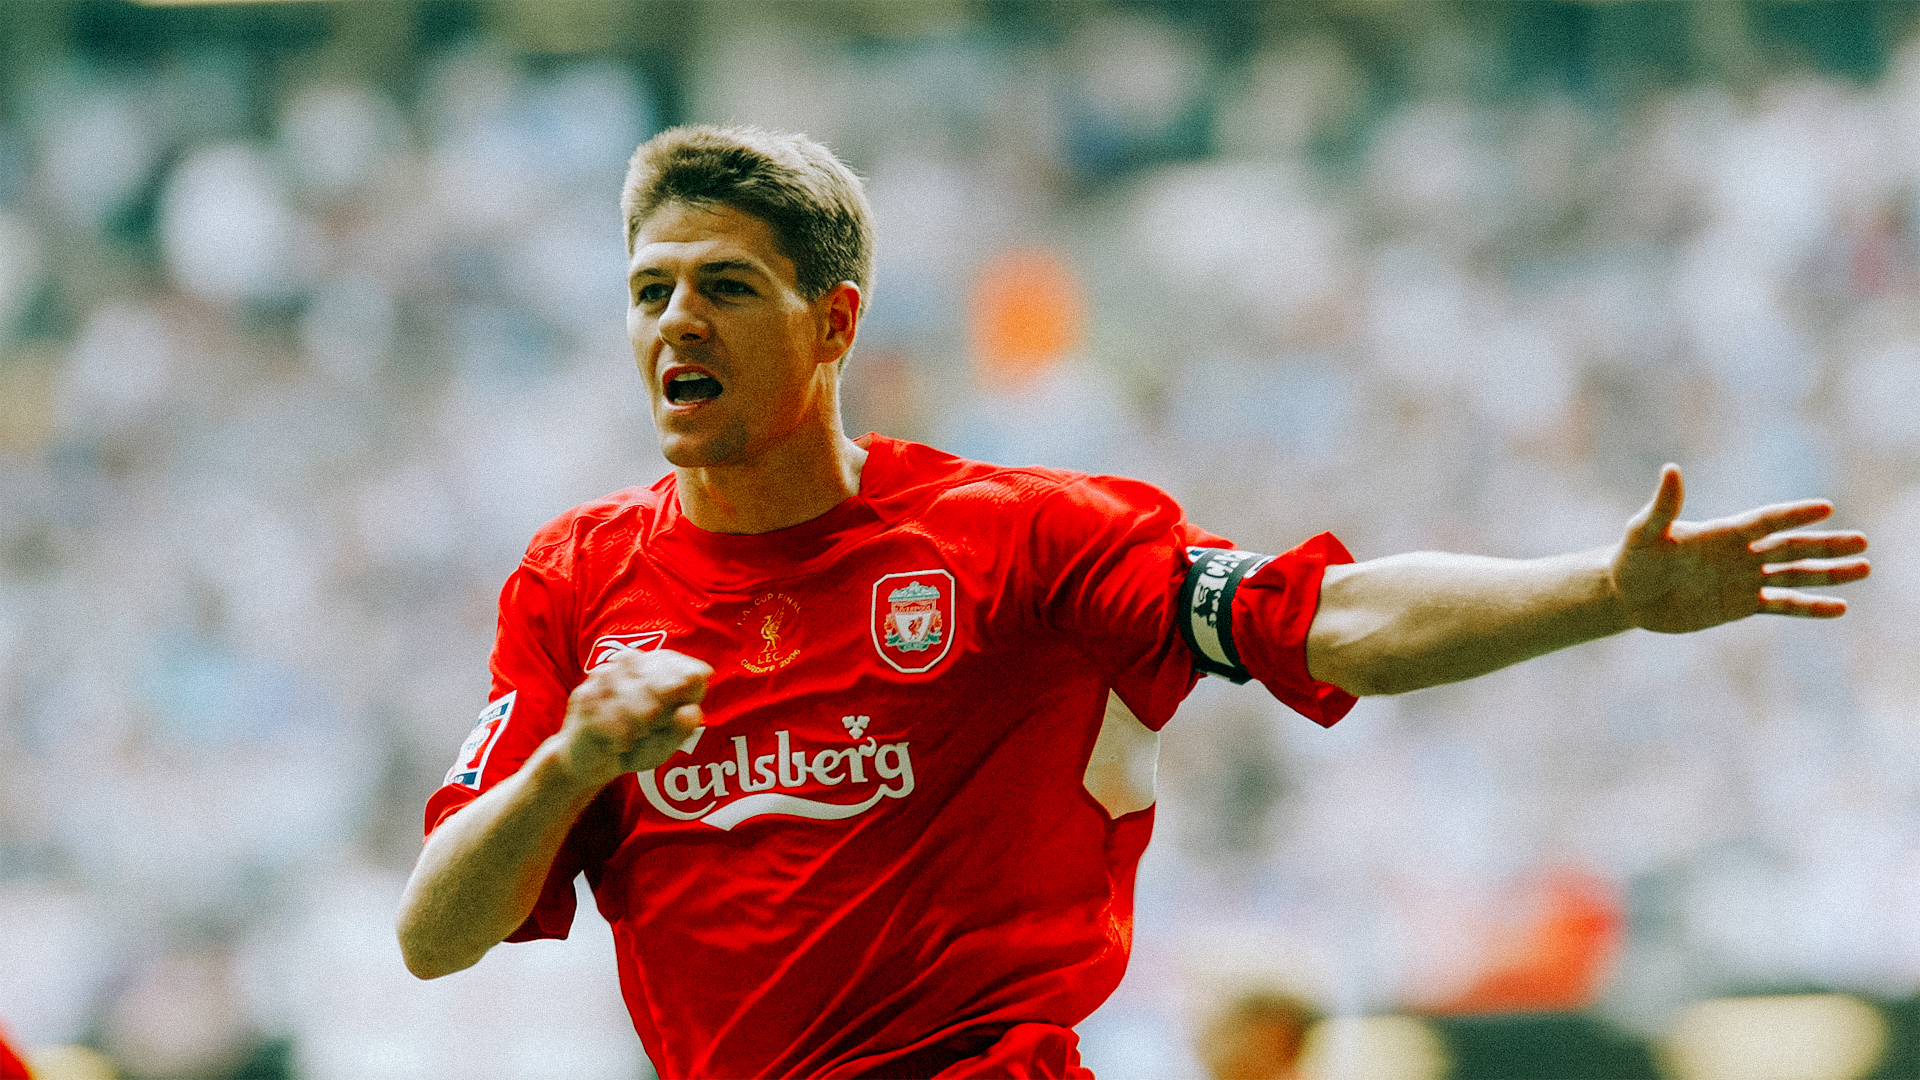 The story of The Gerrard Final - Liverpool FC